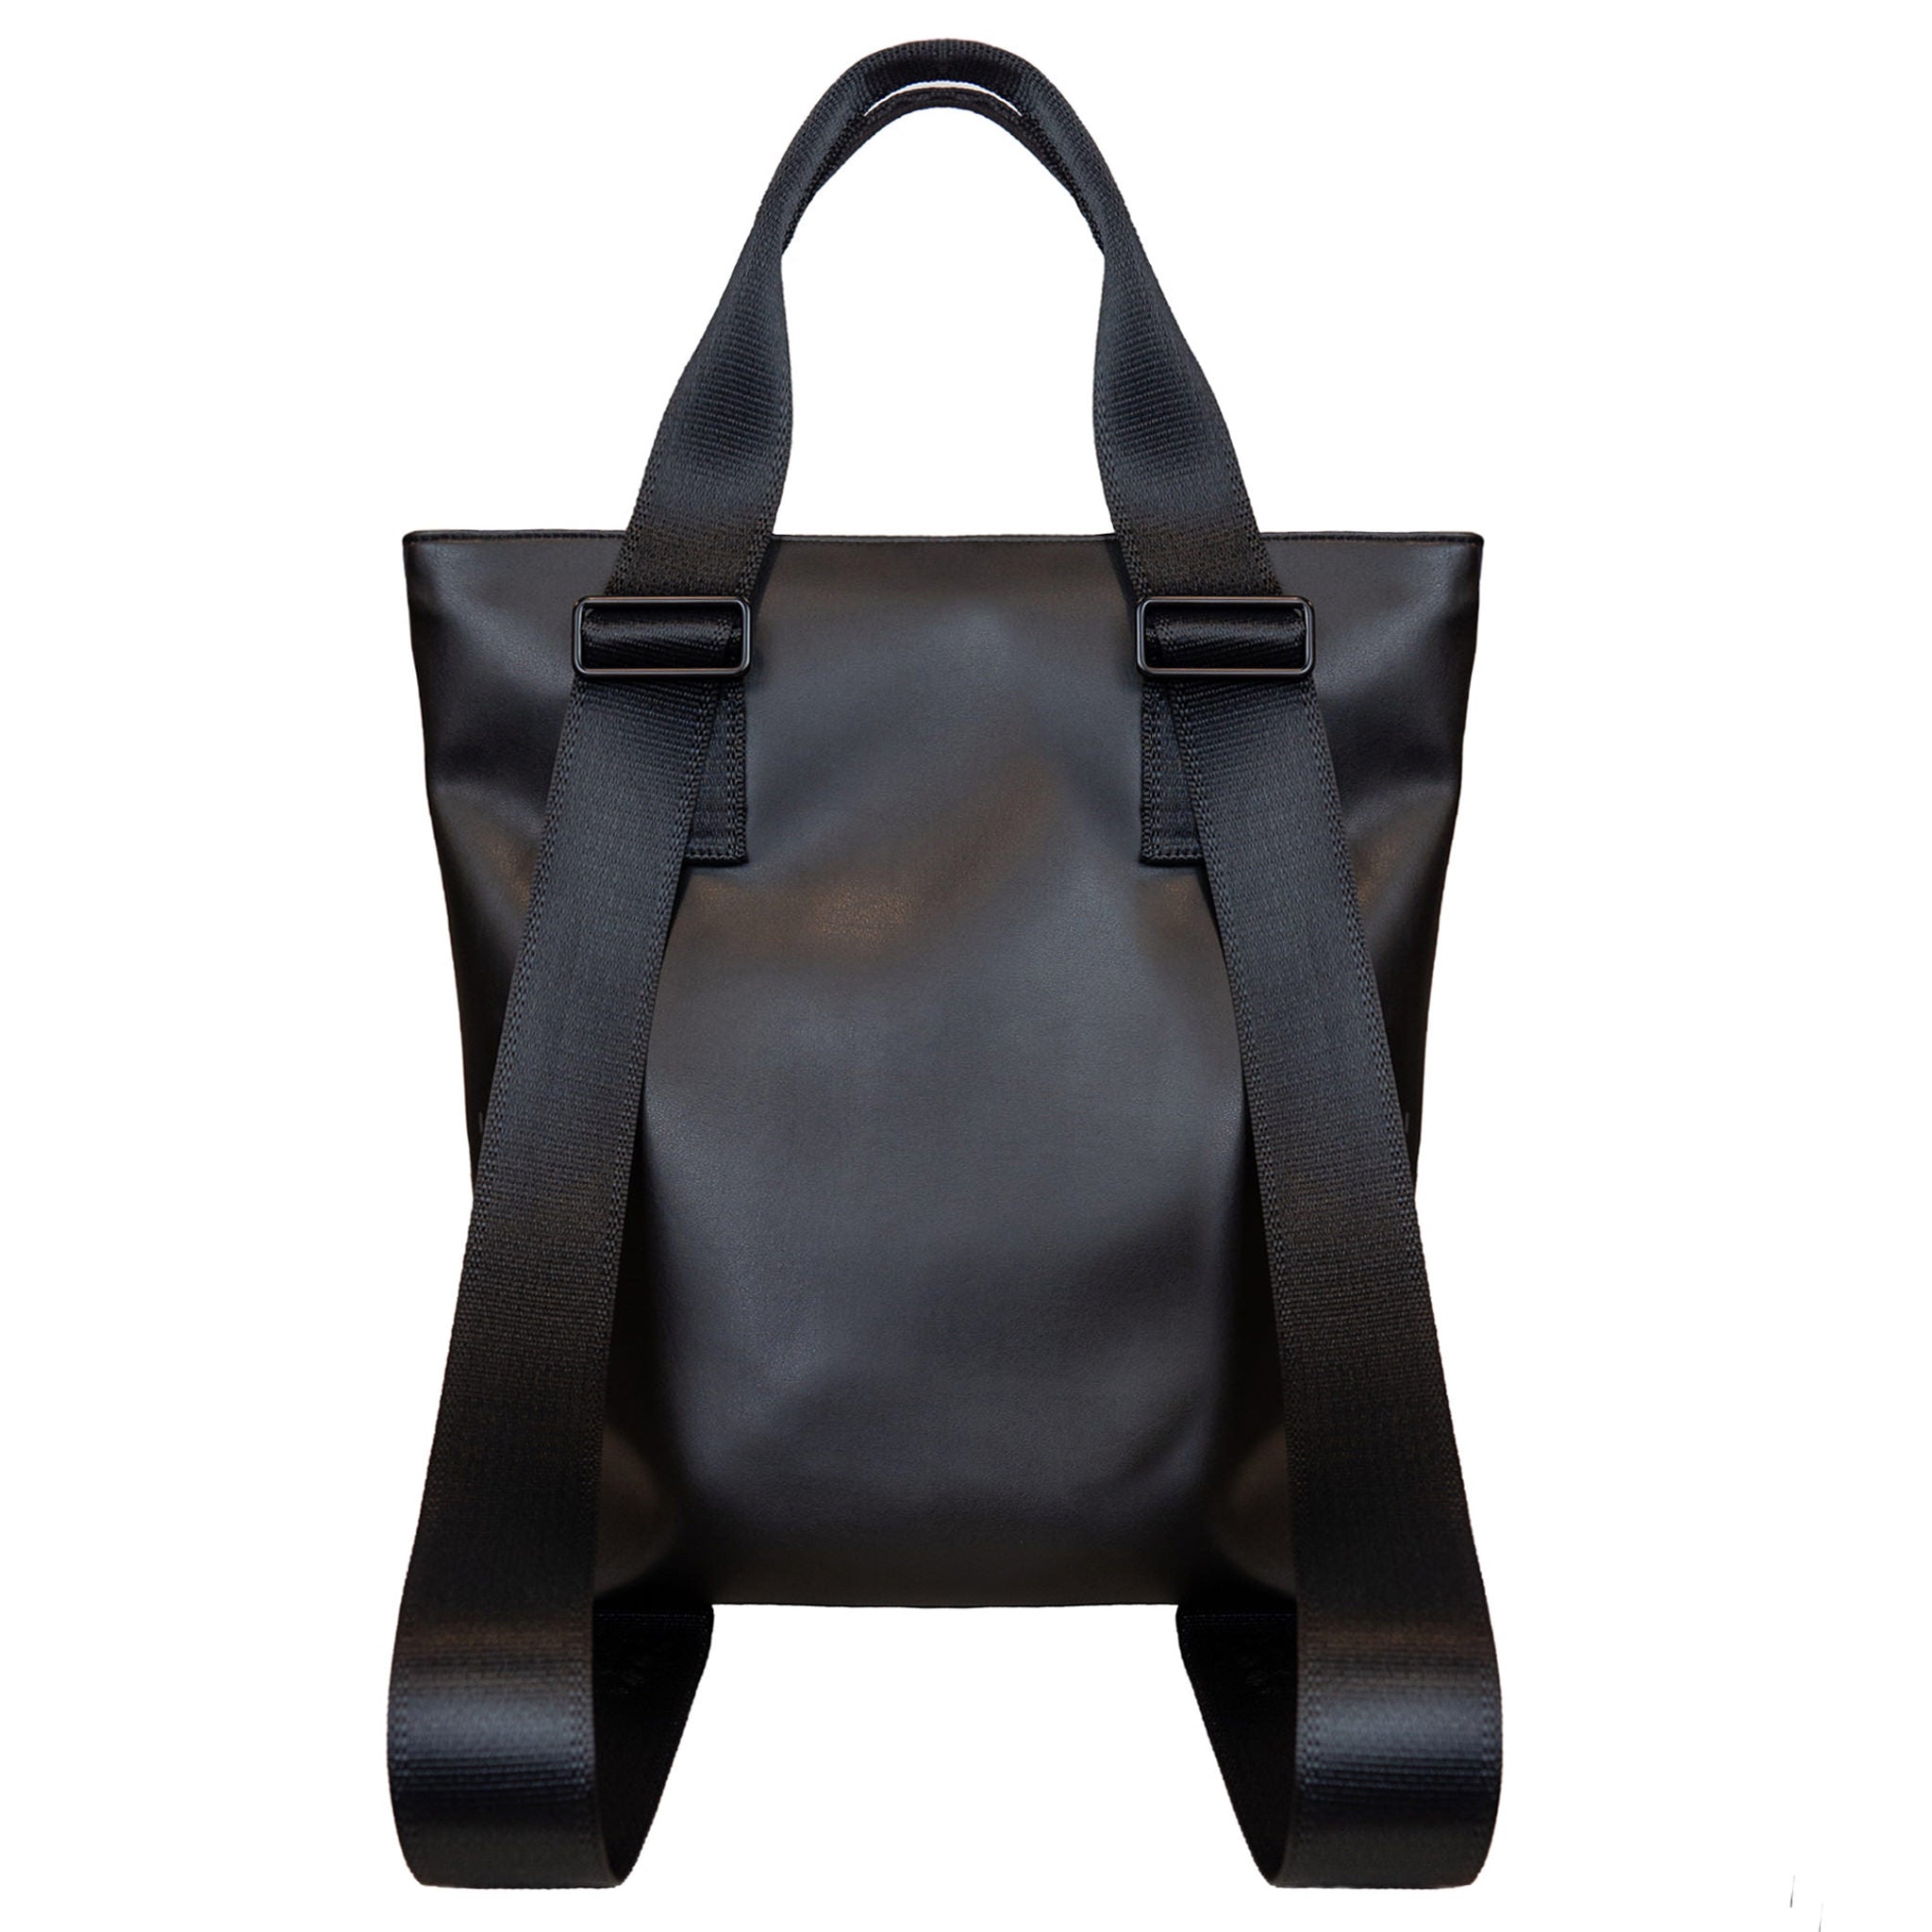 Back view of a totepack made with black vegan leather. The convertible strap is extended to show the backpack option